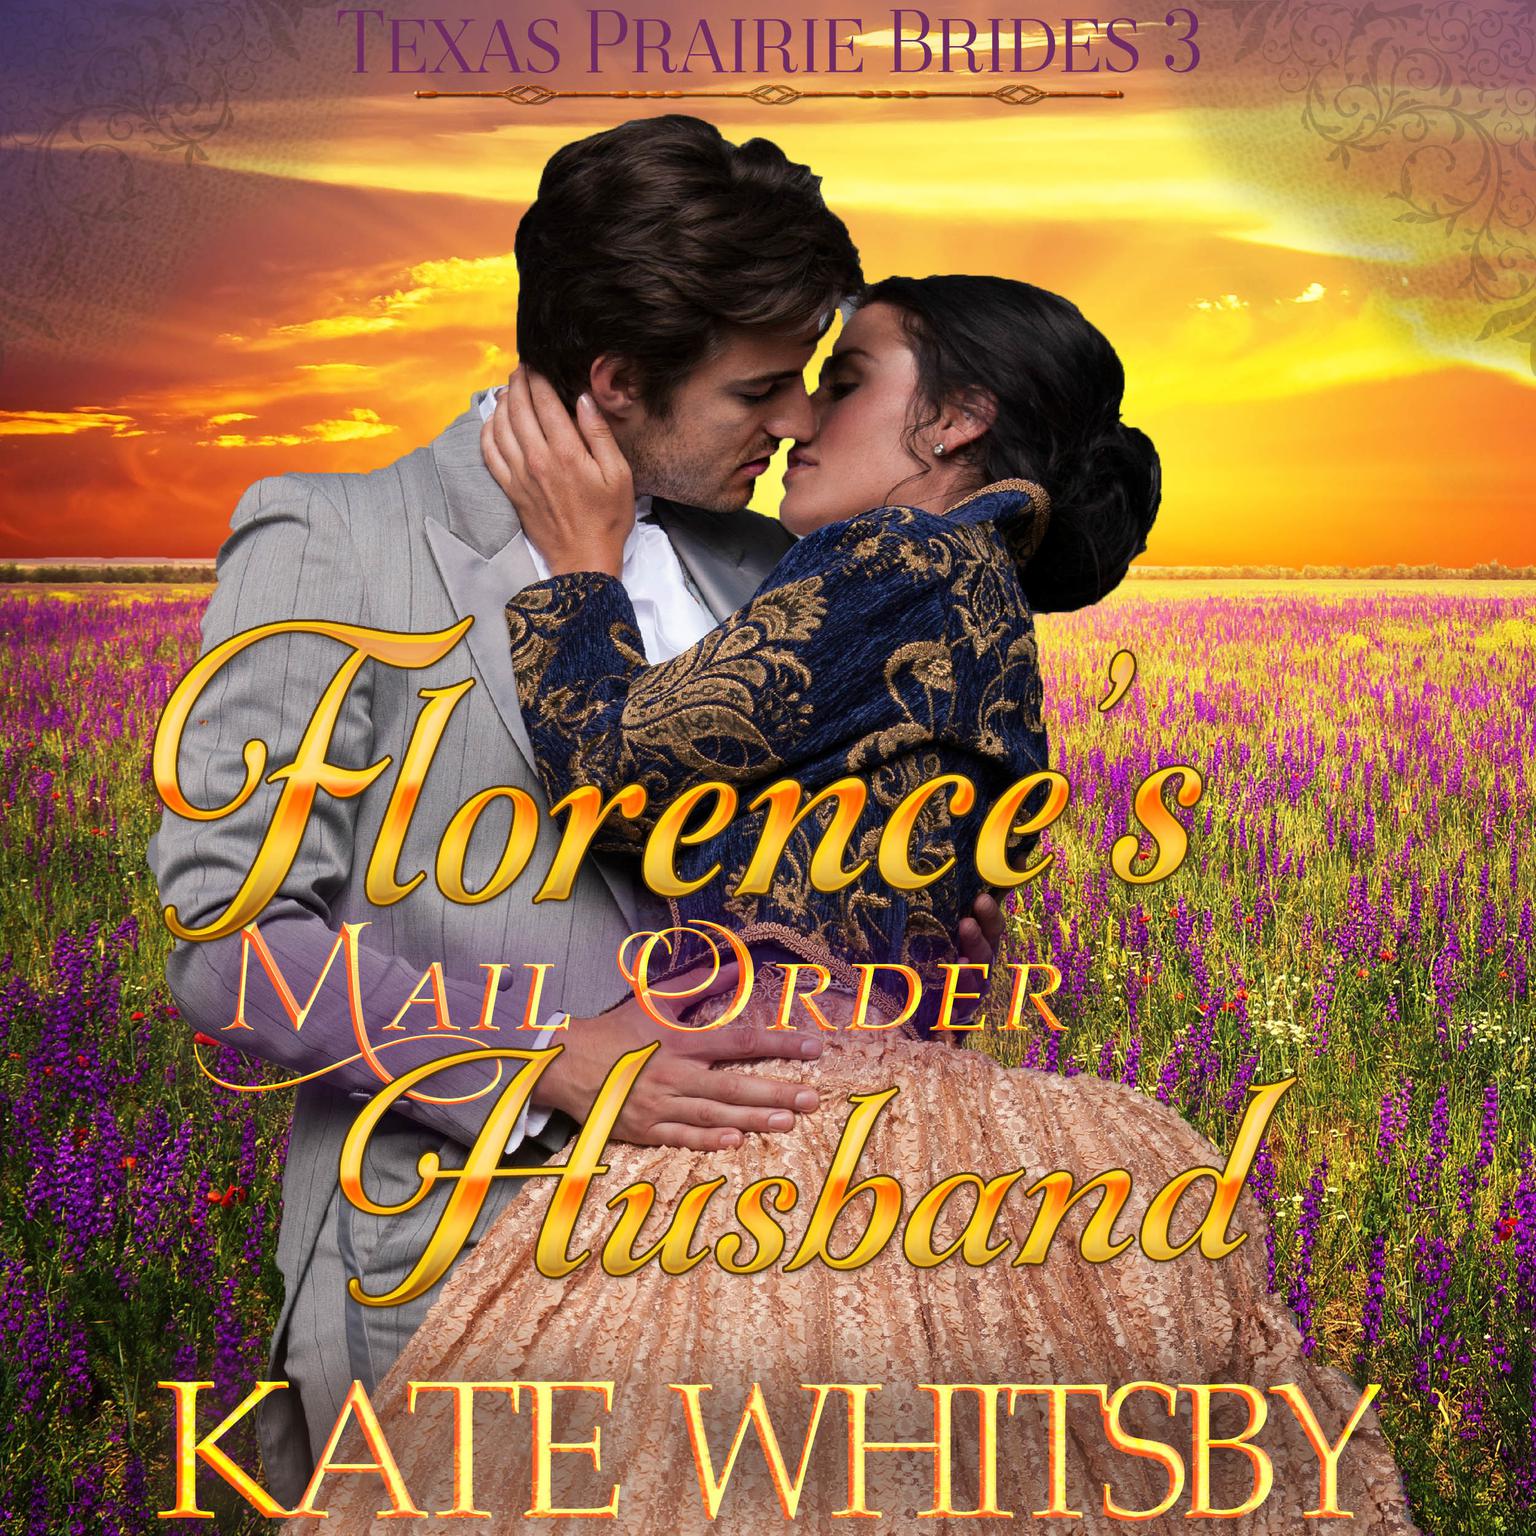 Florences Mail Order Husband (Texas Prairie Brides, Book 3) Audiobook, by Kate Whitsby